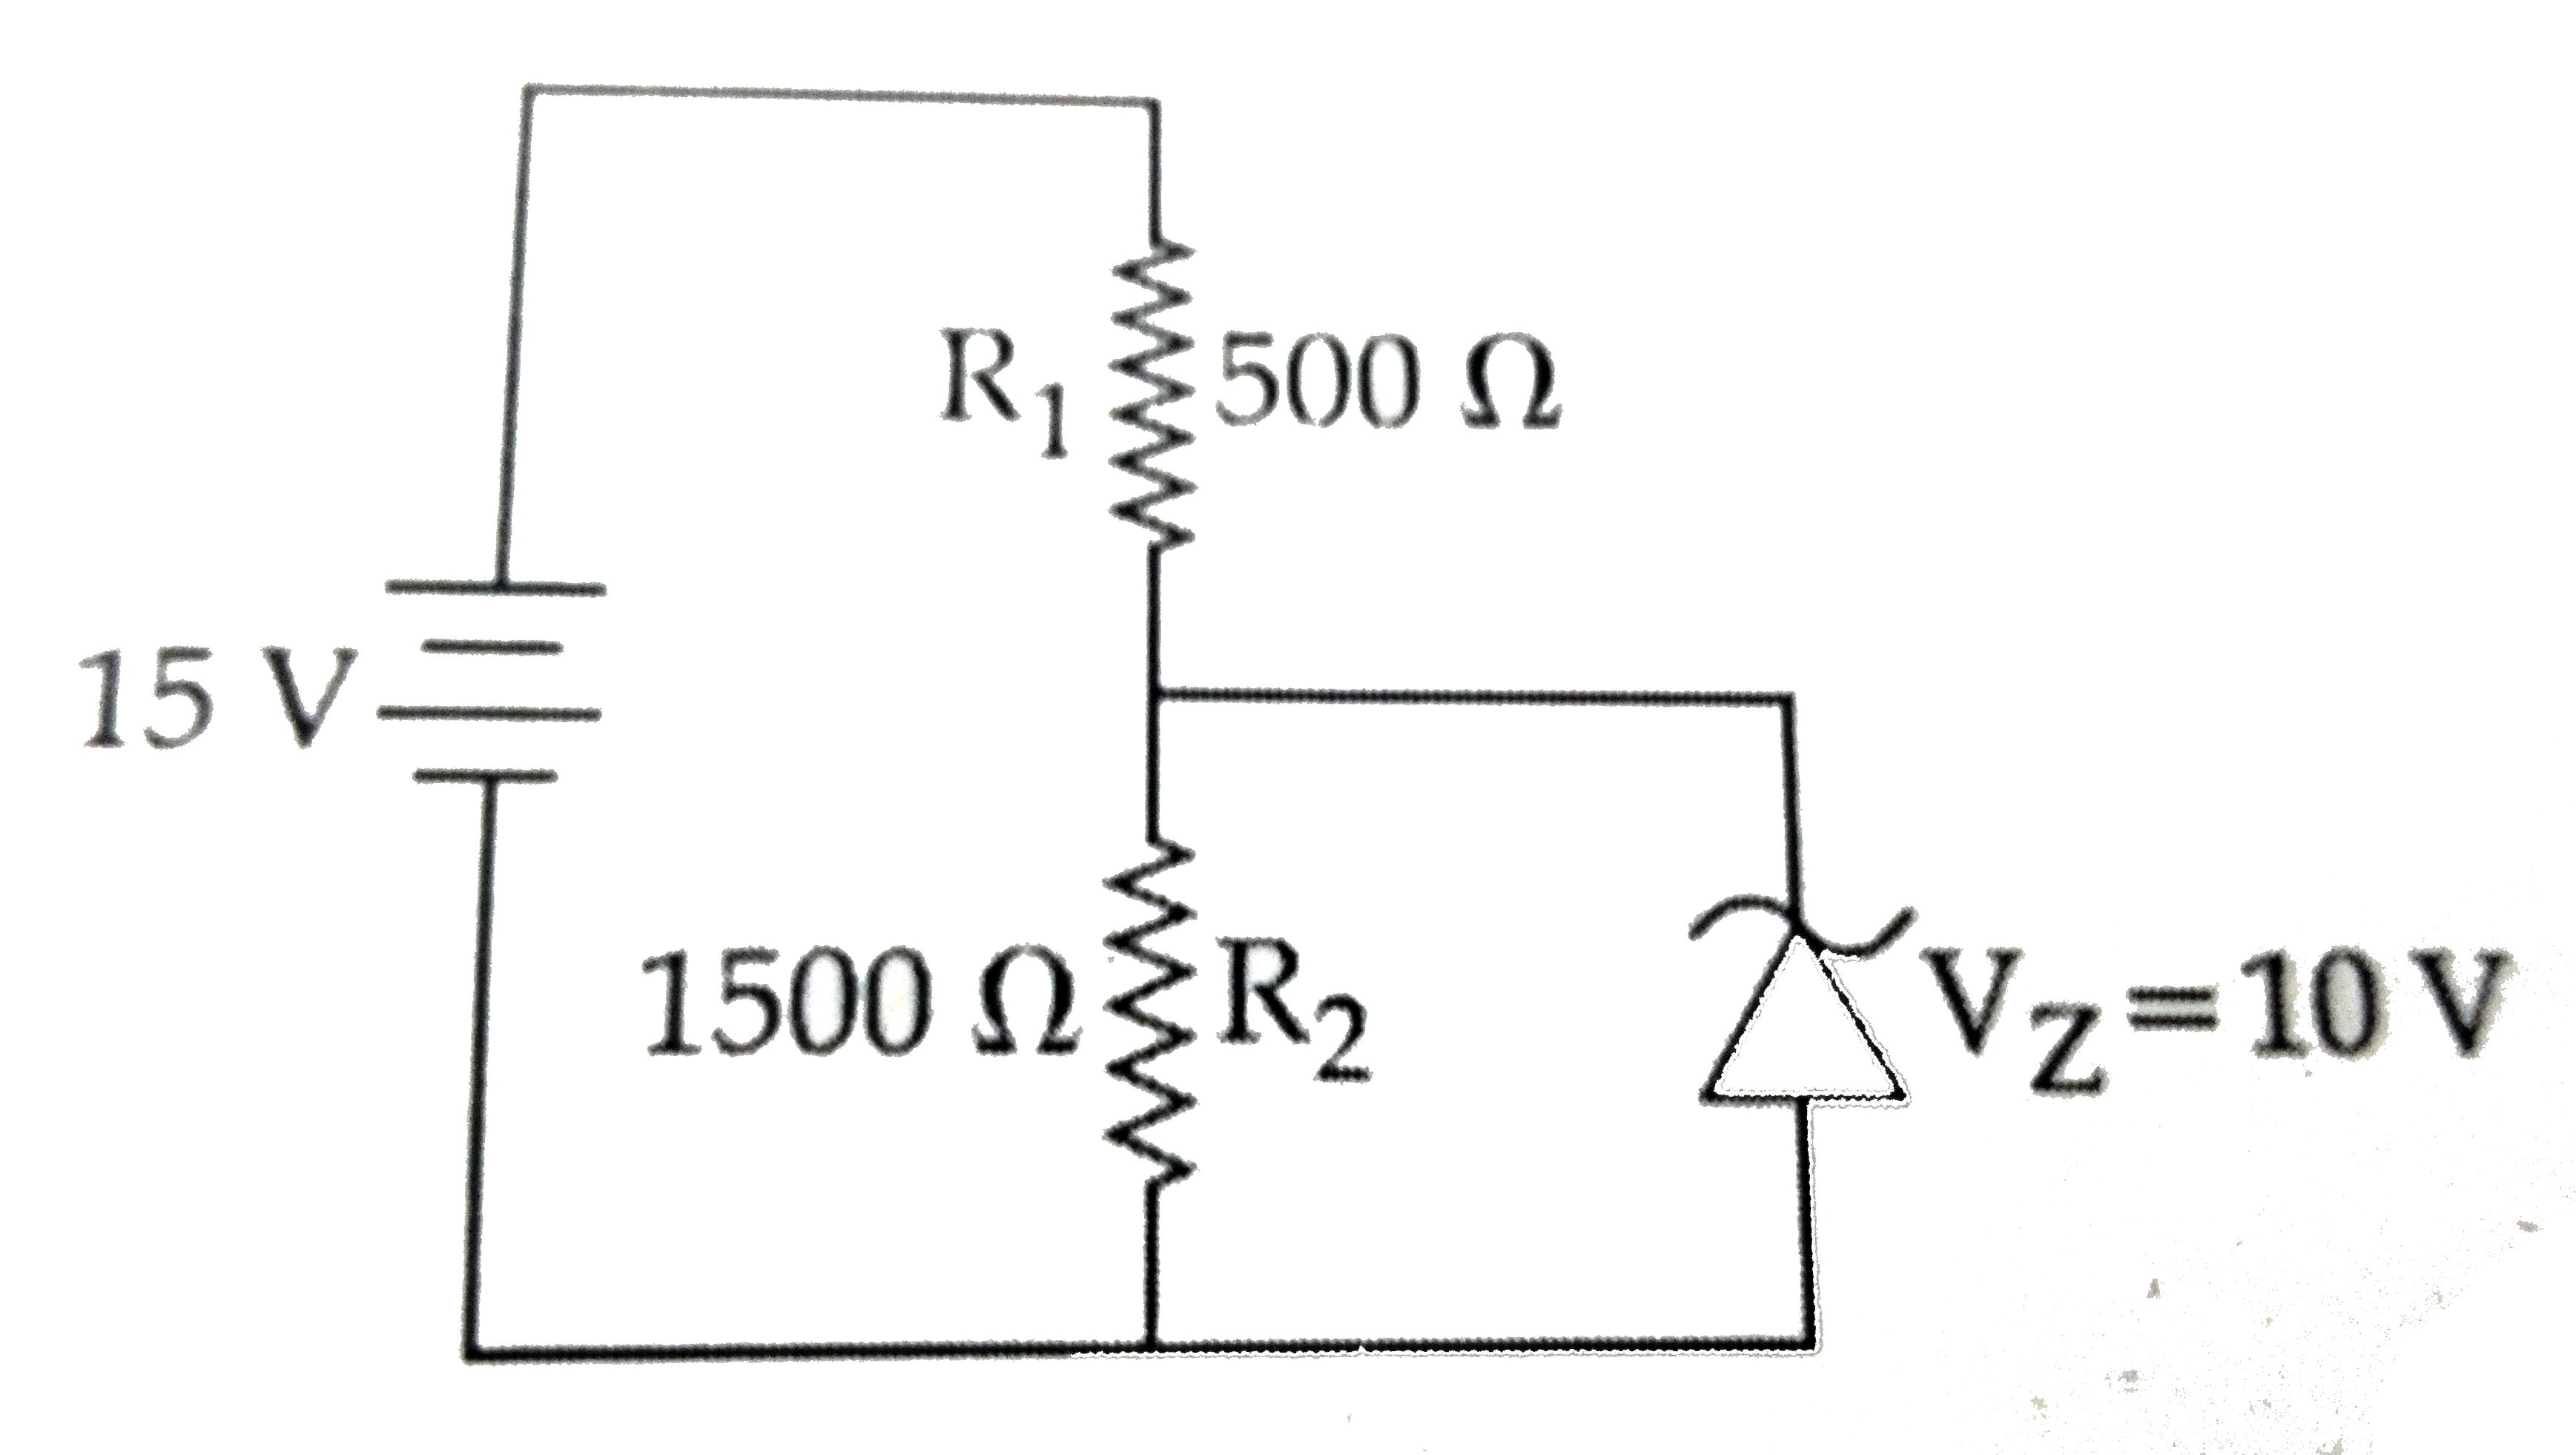 In the given circuit, the current through zener diode is